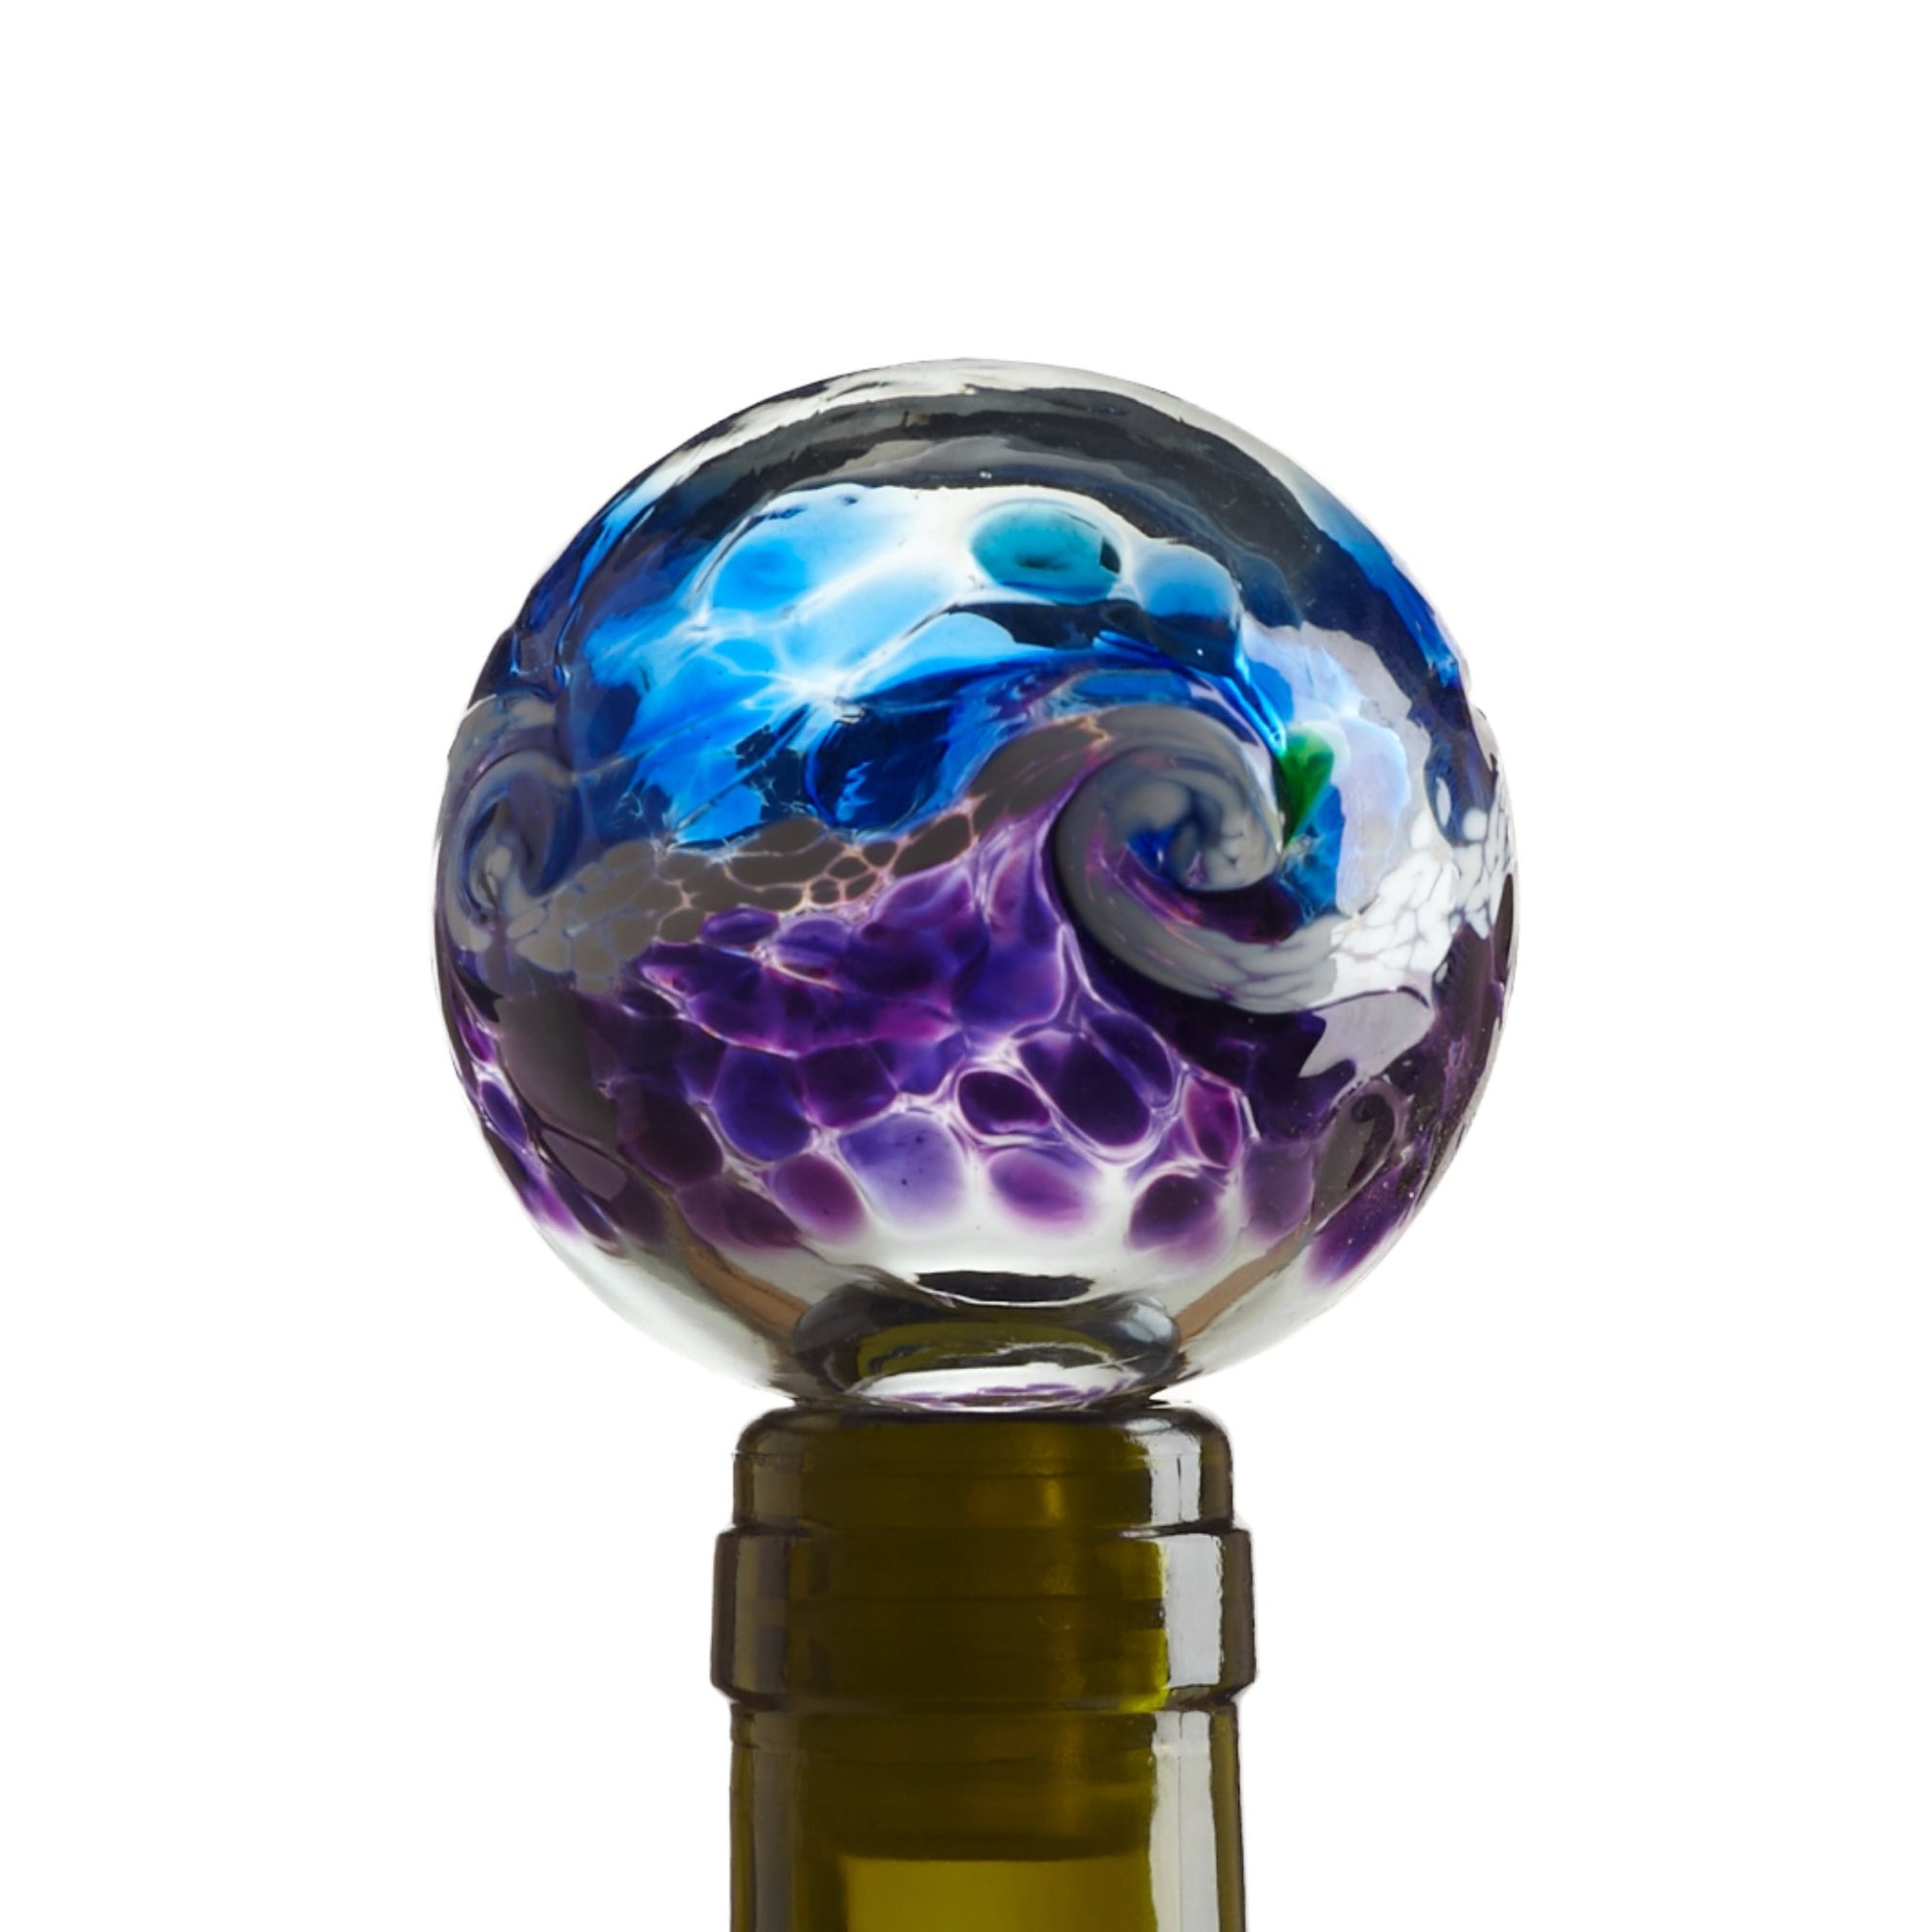 Blown glass globe wine stopper with spatterings of transparent yellow on the top half and transparent pink on the bottom. The two colors meet in a swirl of white and gray that looks like a wave. Pictured in the neck of a green wine bottle.